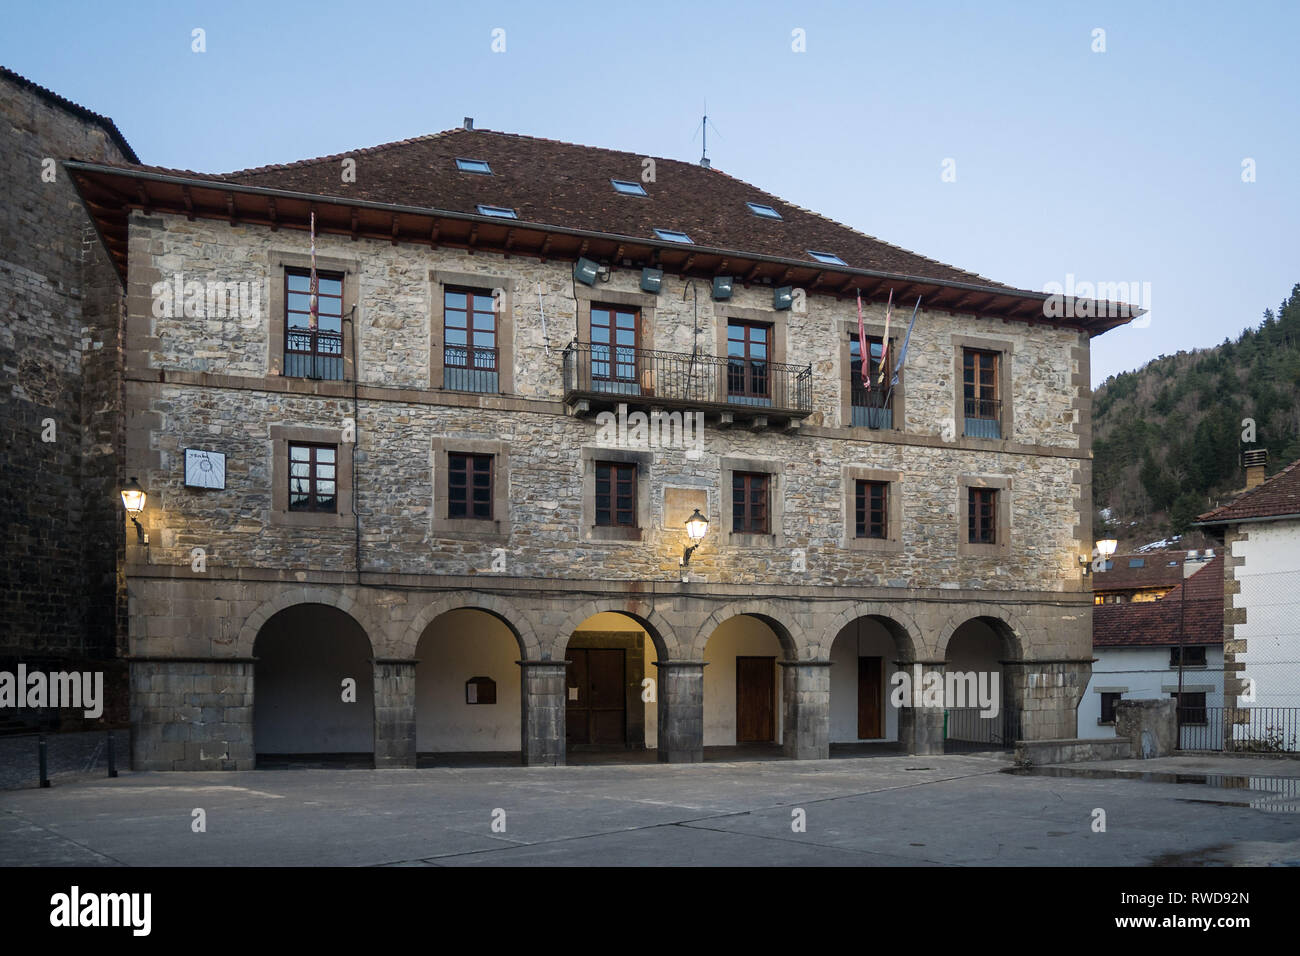 Town hall of Isaba, Roncal Valley, Navarre, Spain Stock Photo